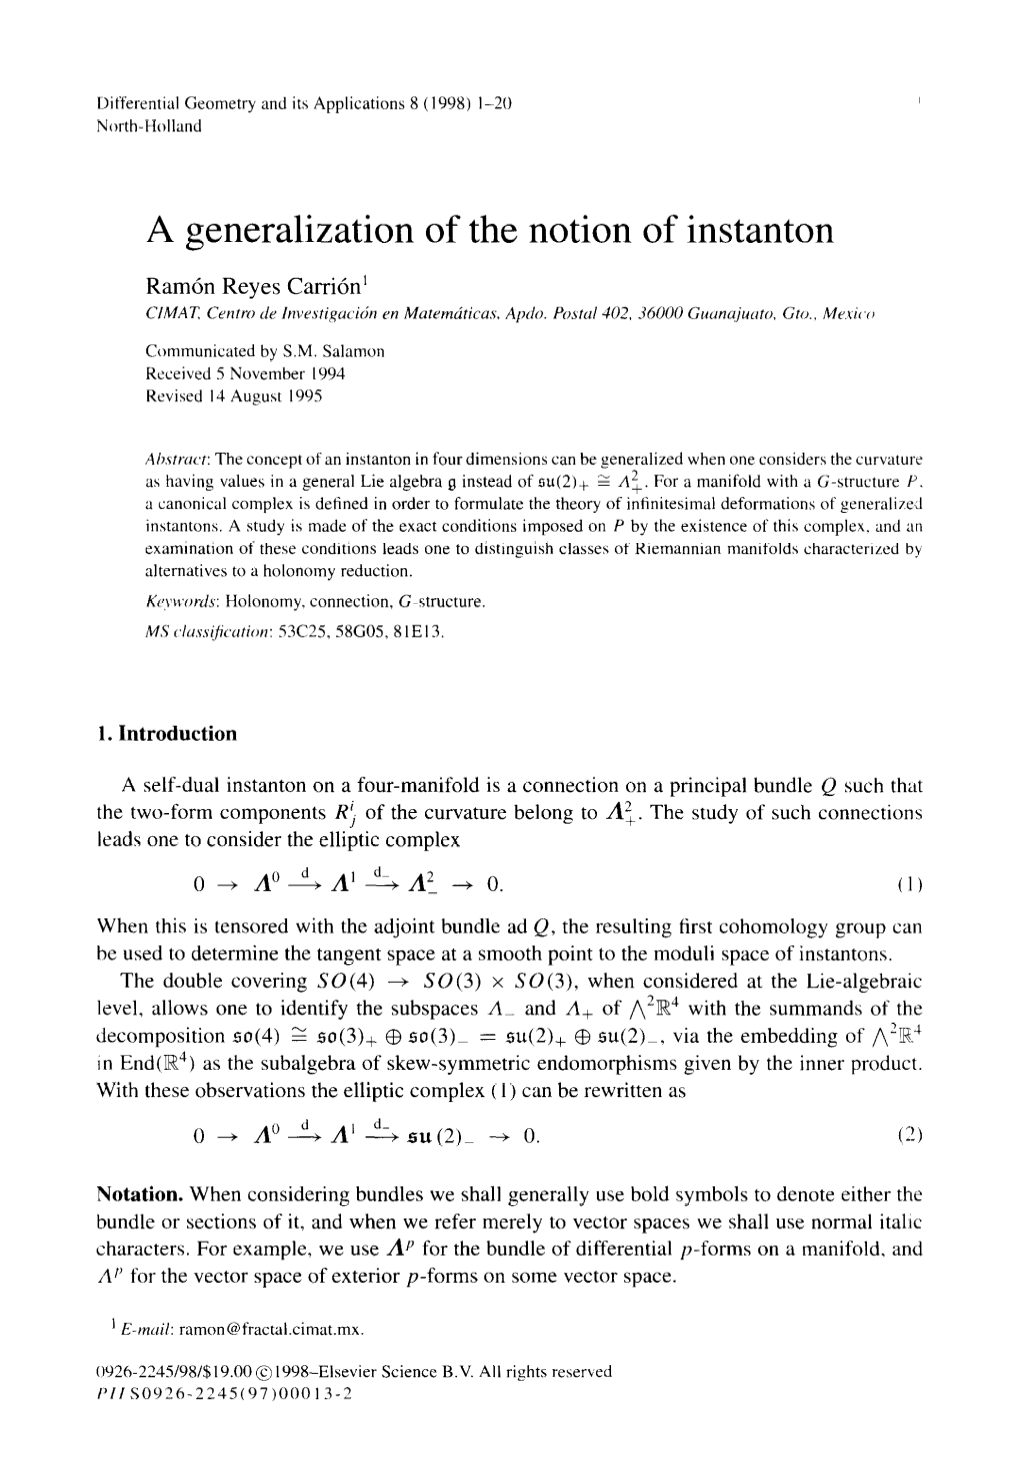 A Generalization of the Notion of Instanton